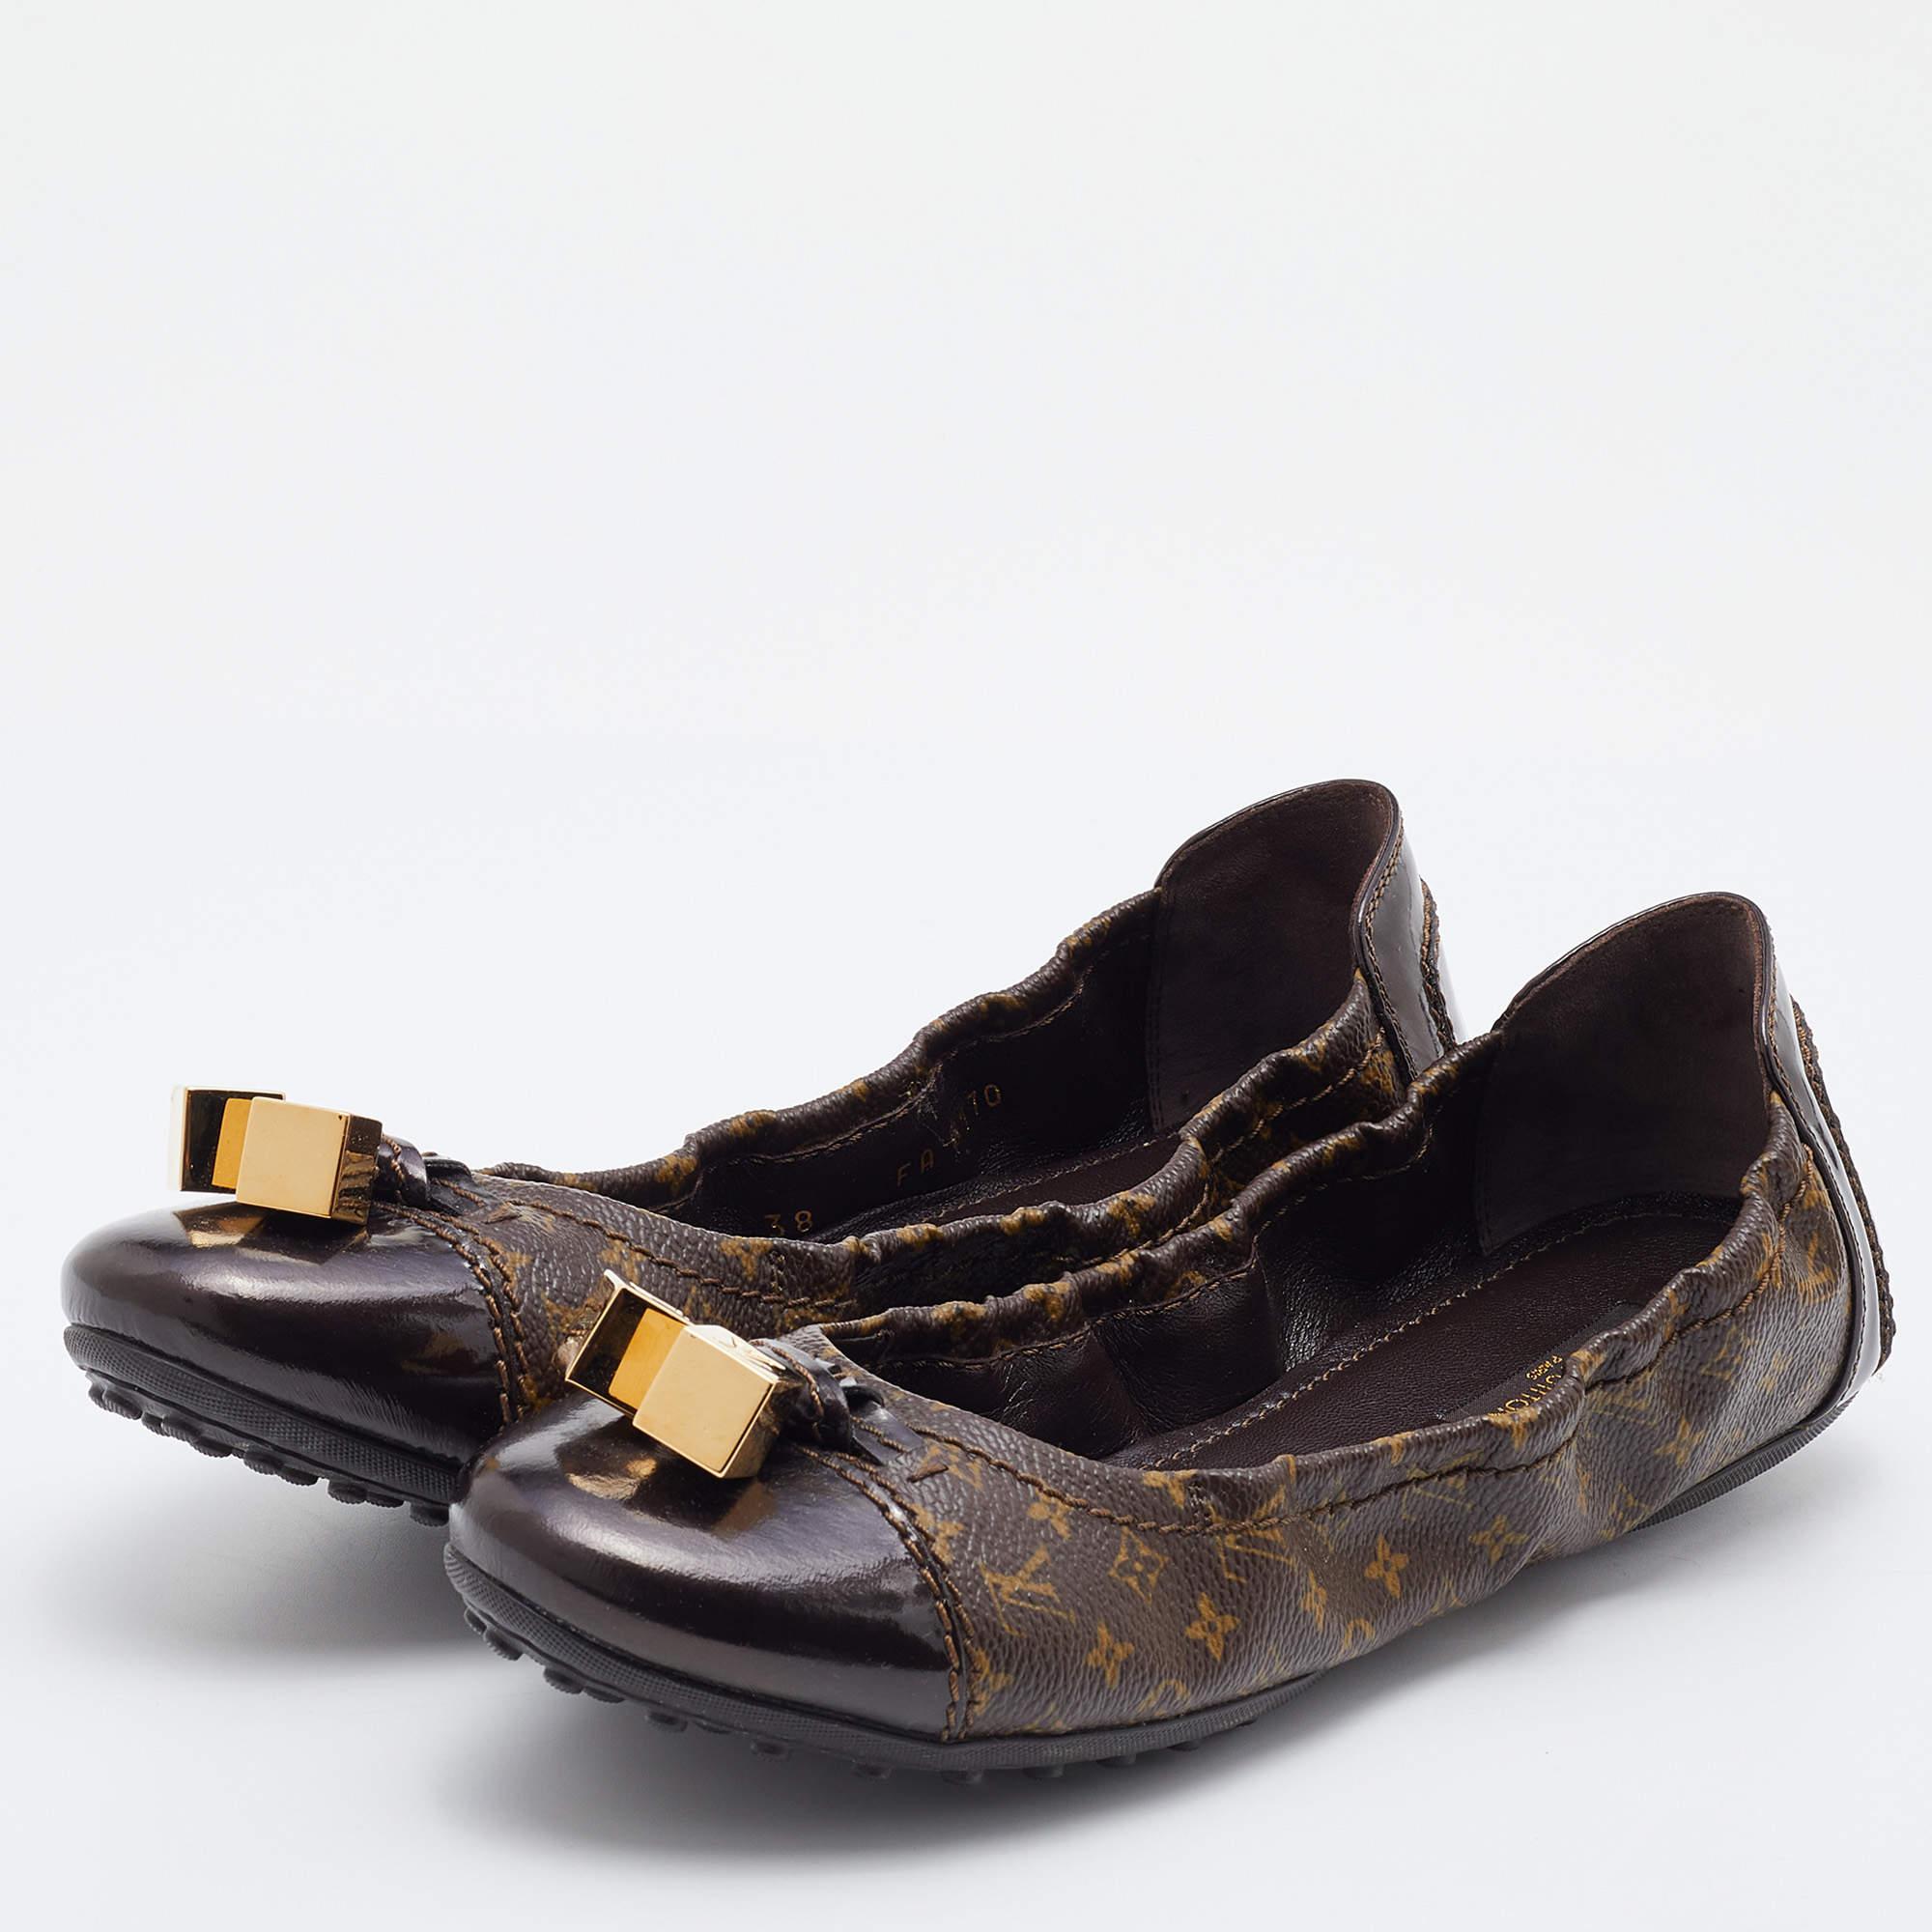 These Louis Vuitton ballet flats are simply elegant and luxe. Crafted from the brown Monogram canvas, they flaunt leather cap toes with 'LV' engraved cubes on them and a scrunched silhouette.

Includes: Original Dustbag